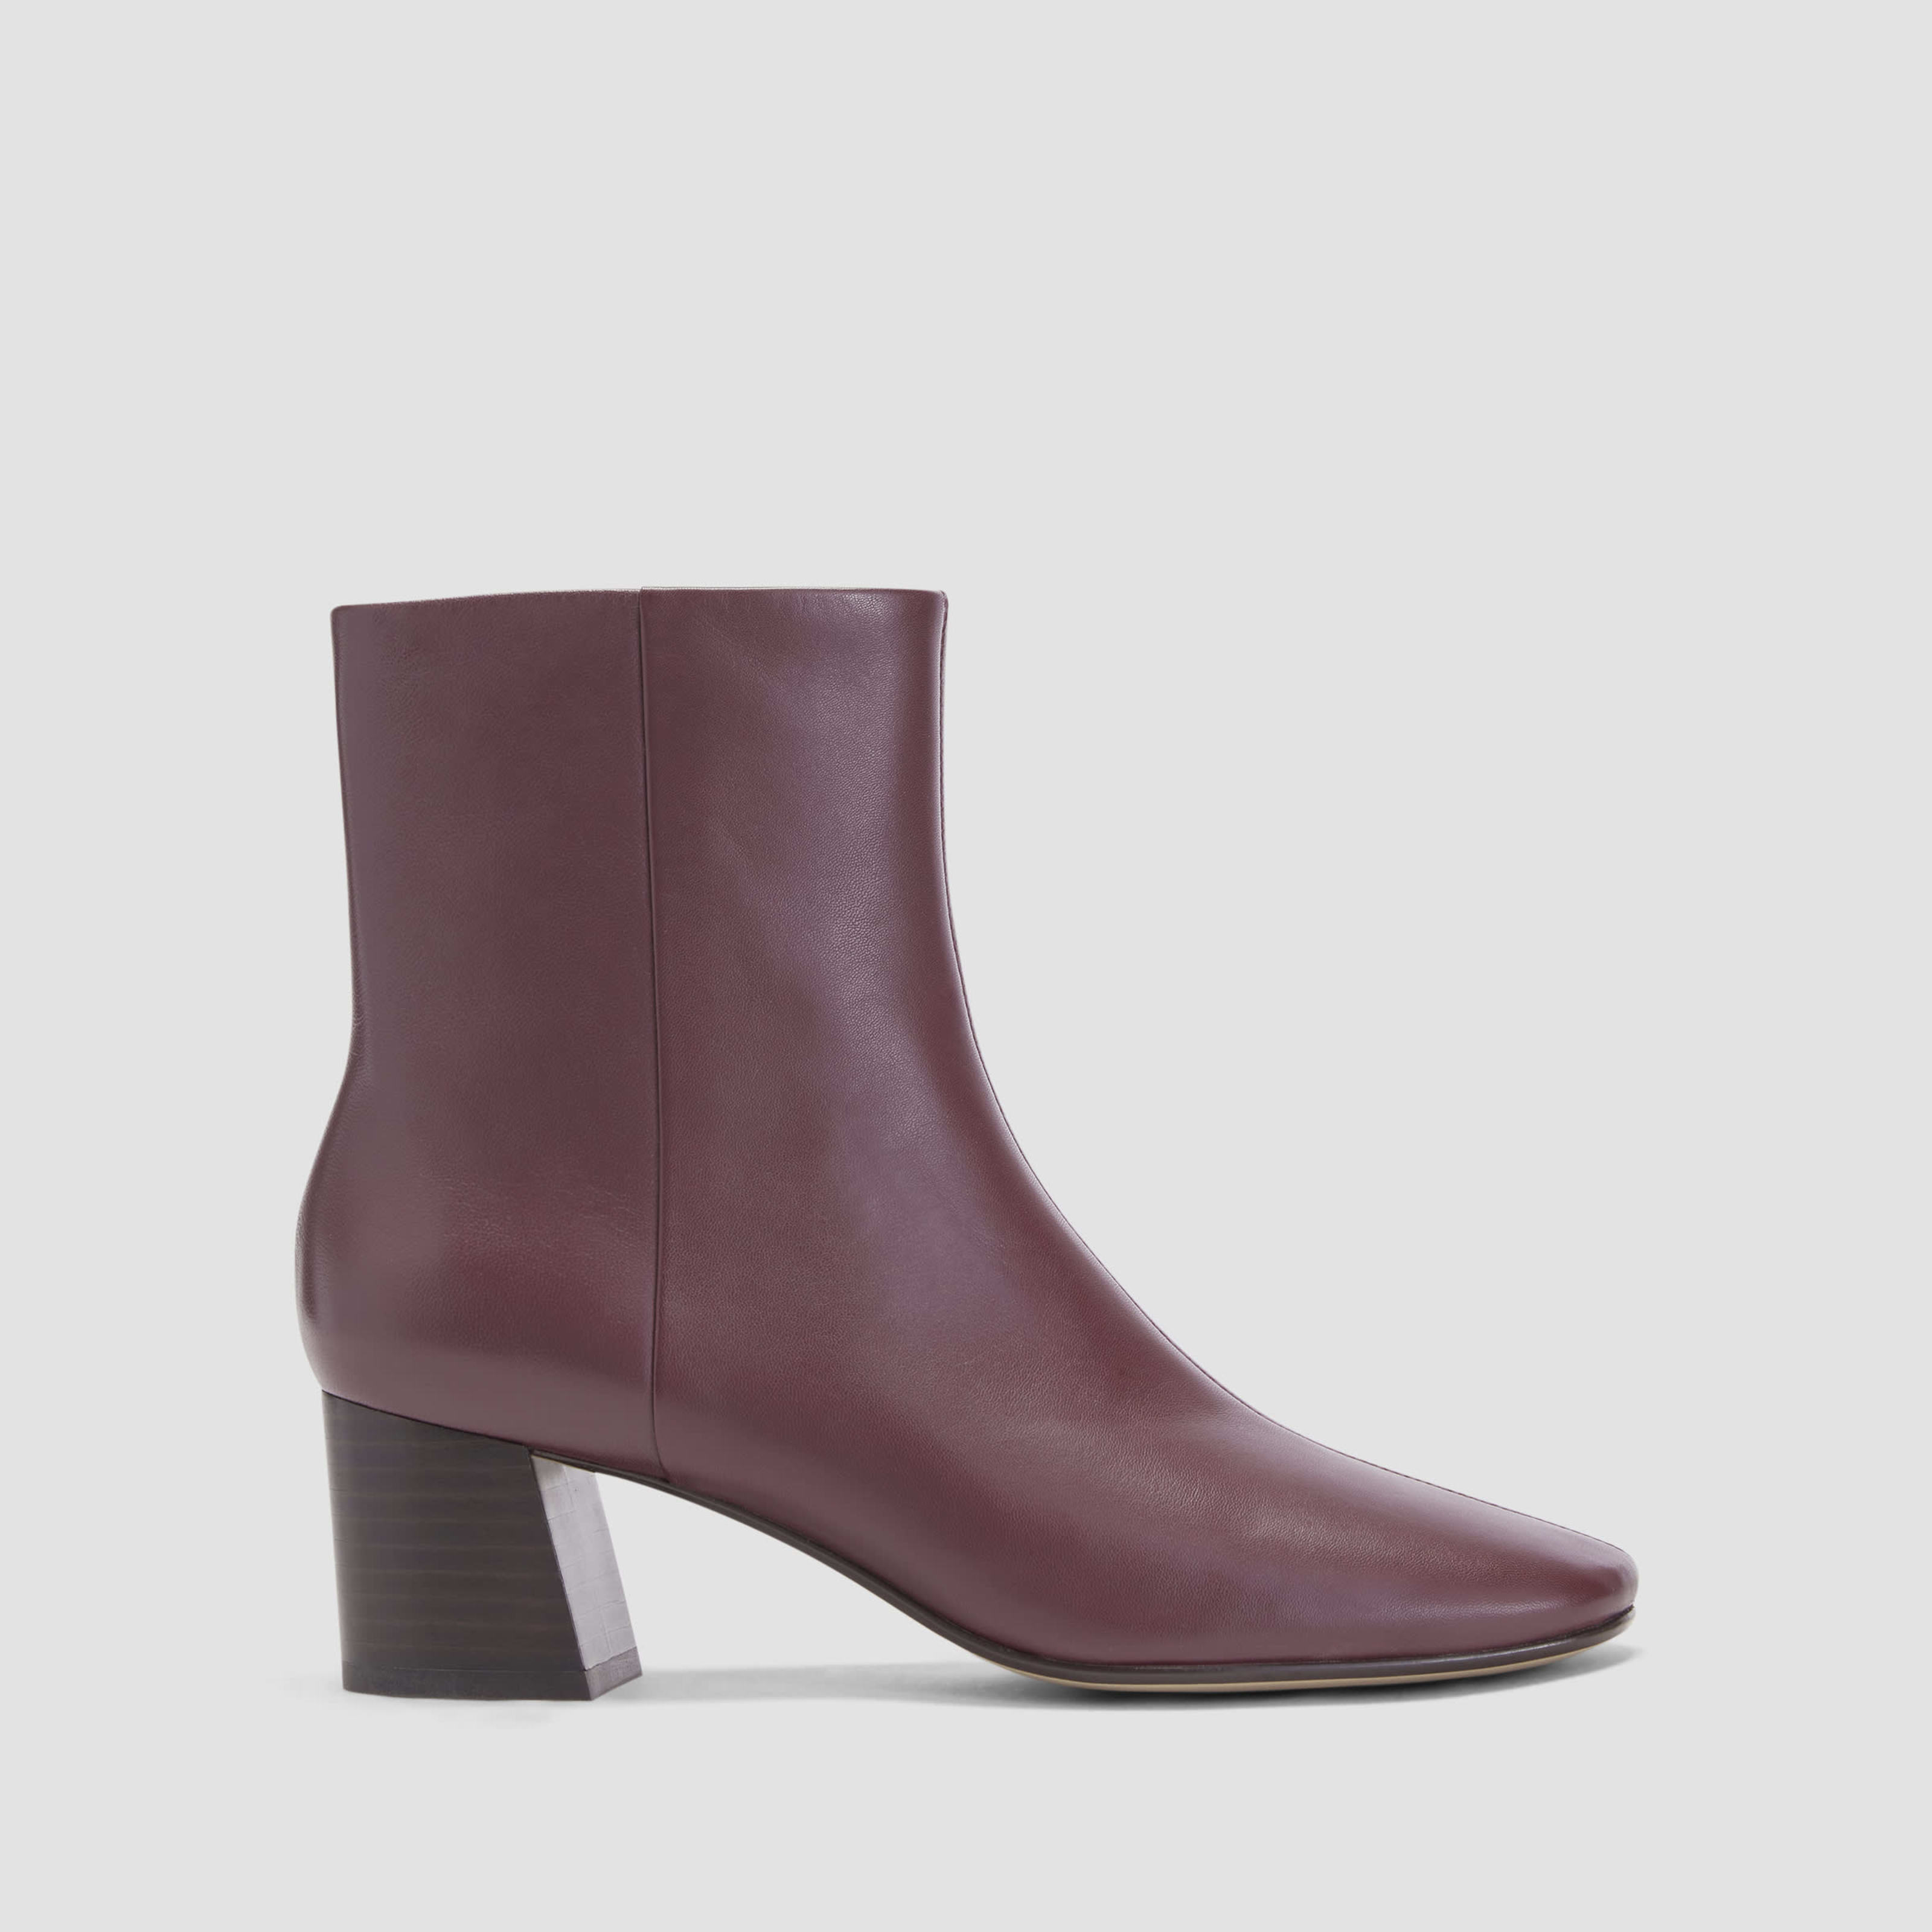 chelsea boot by everlane in bordeaux, size 6